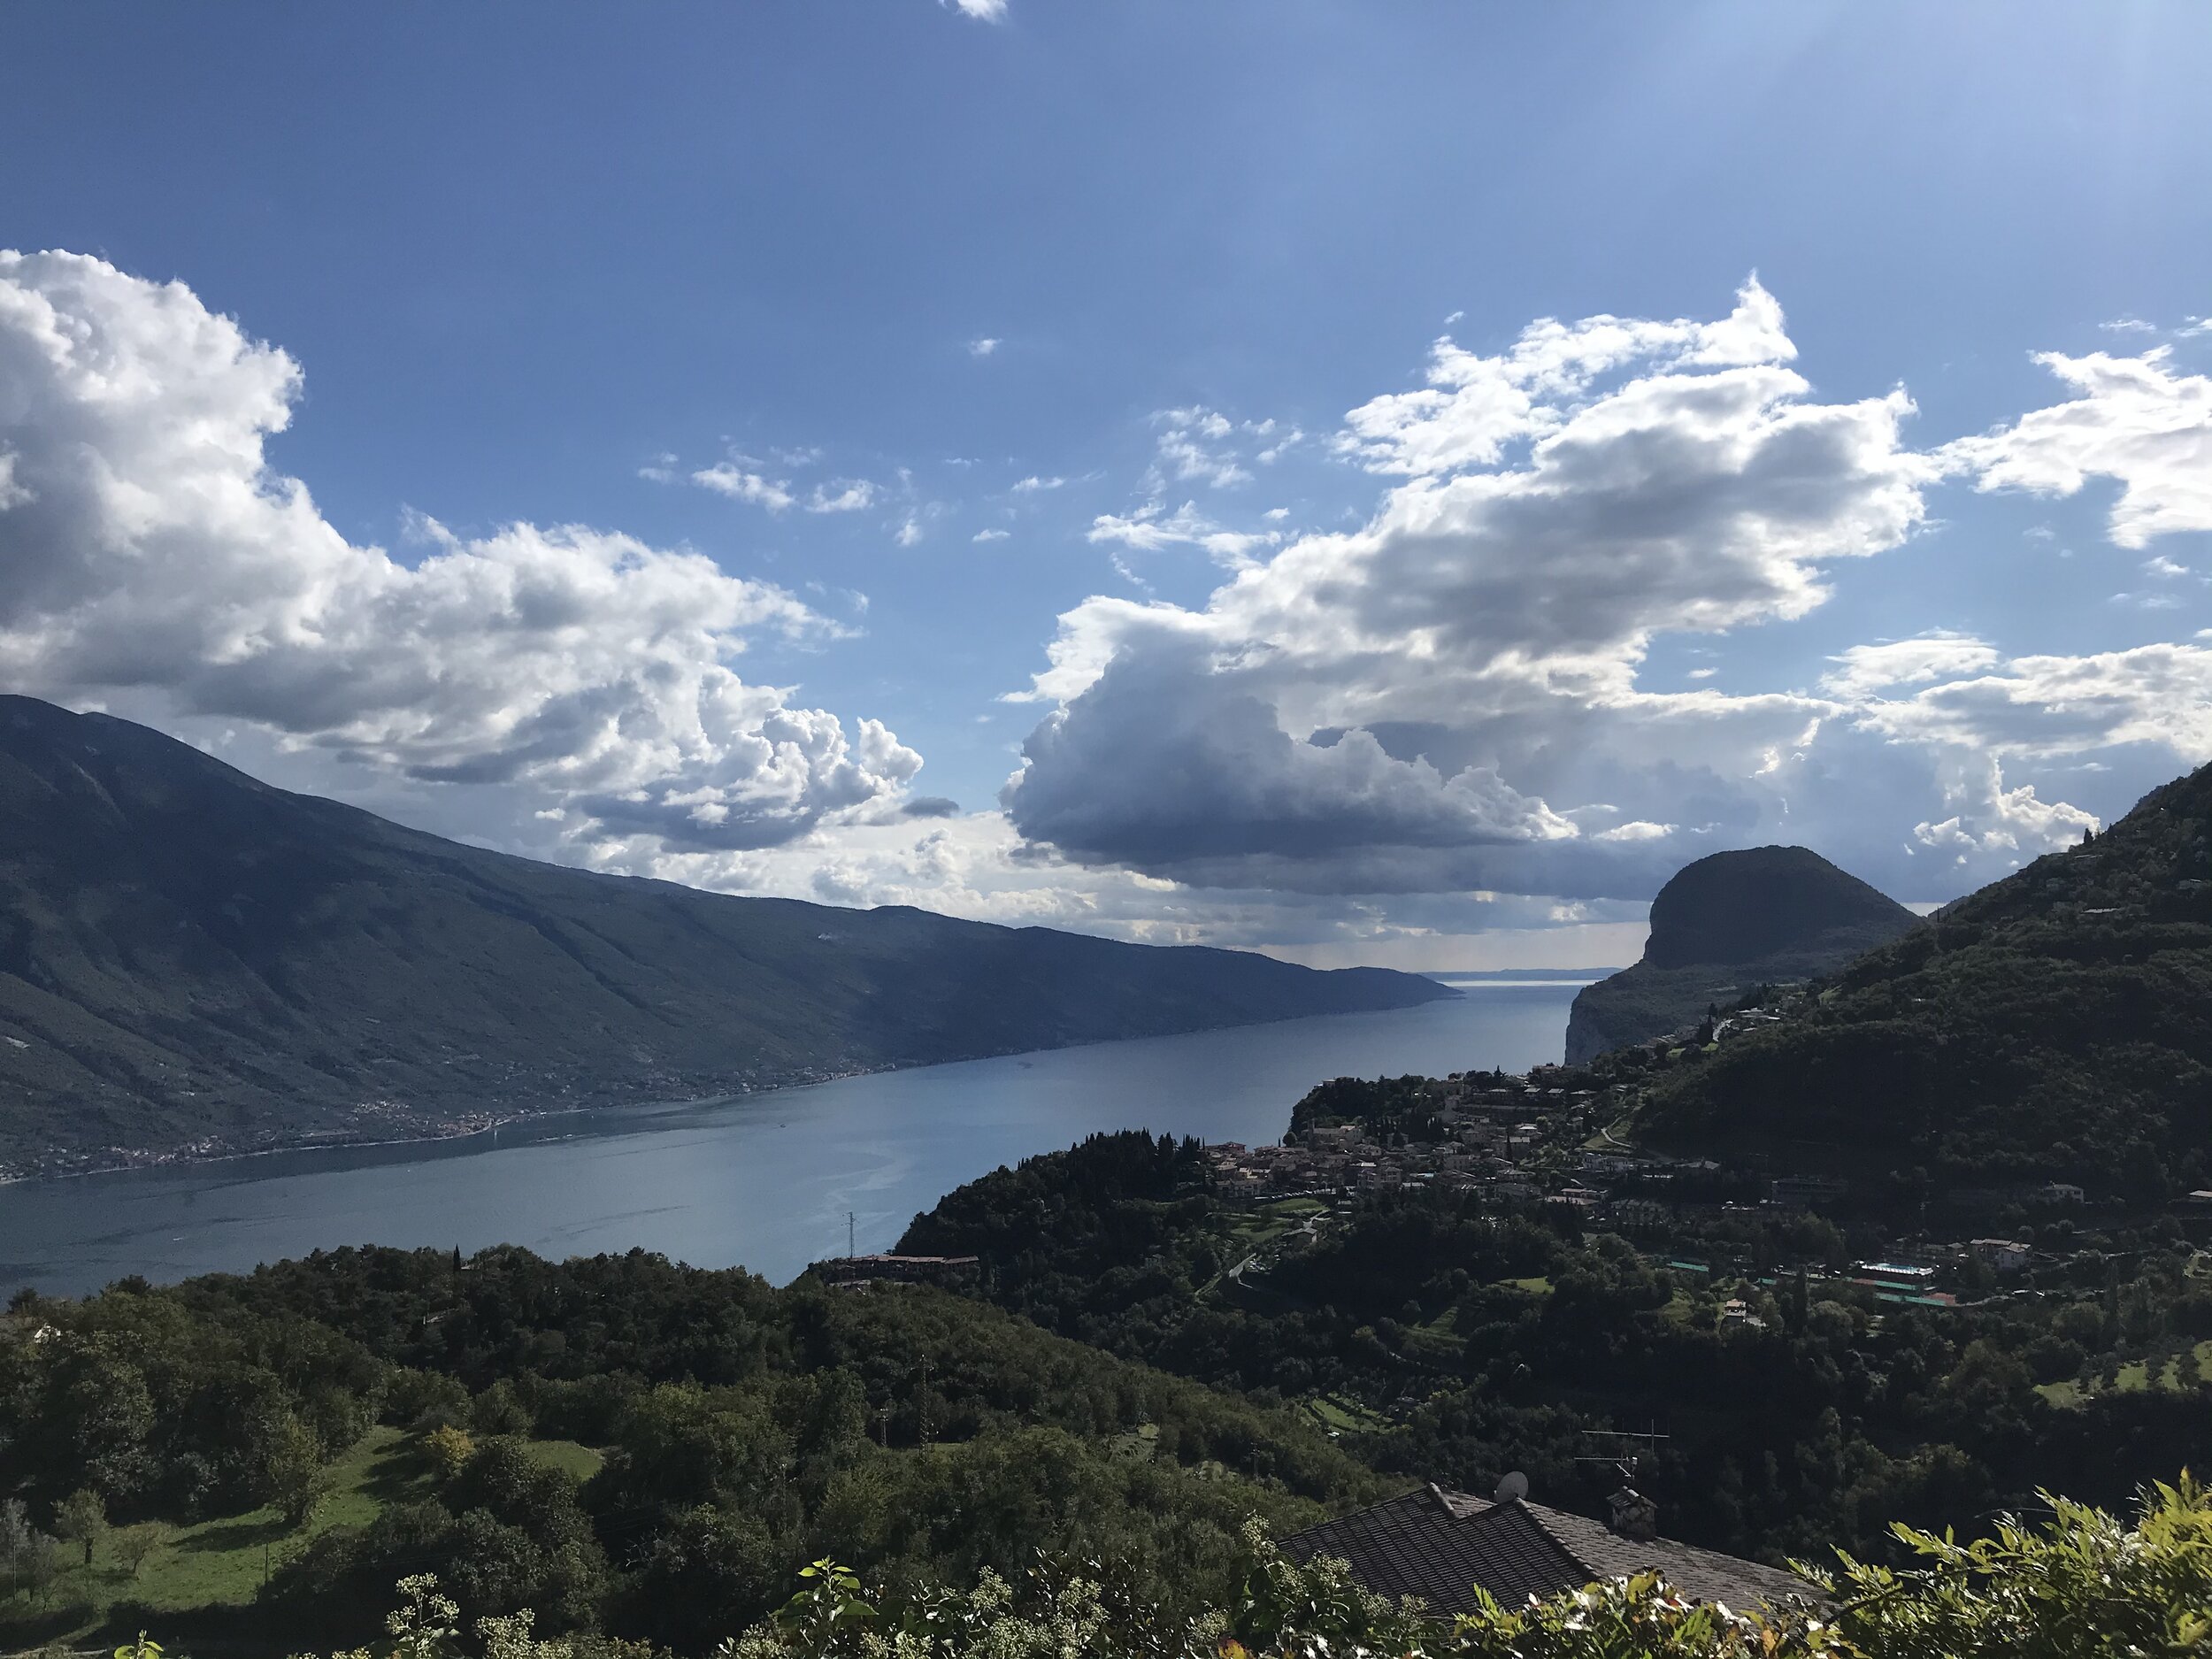 PICTURED: The view of and from some of the small hillside villages that dot the area around Lake Garda.